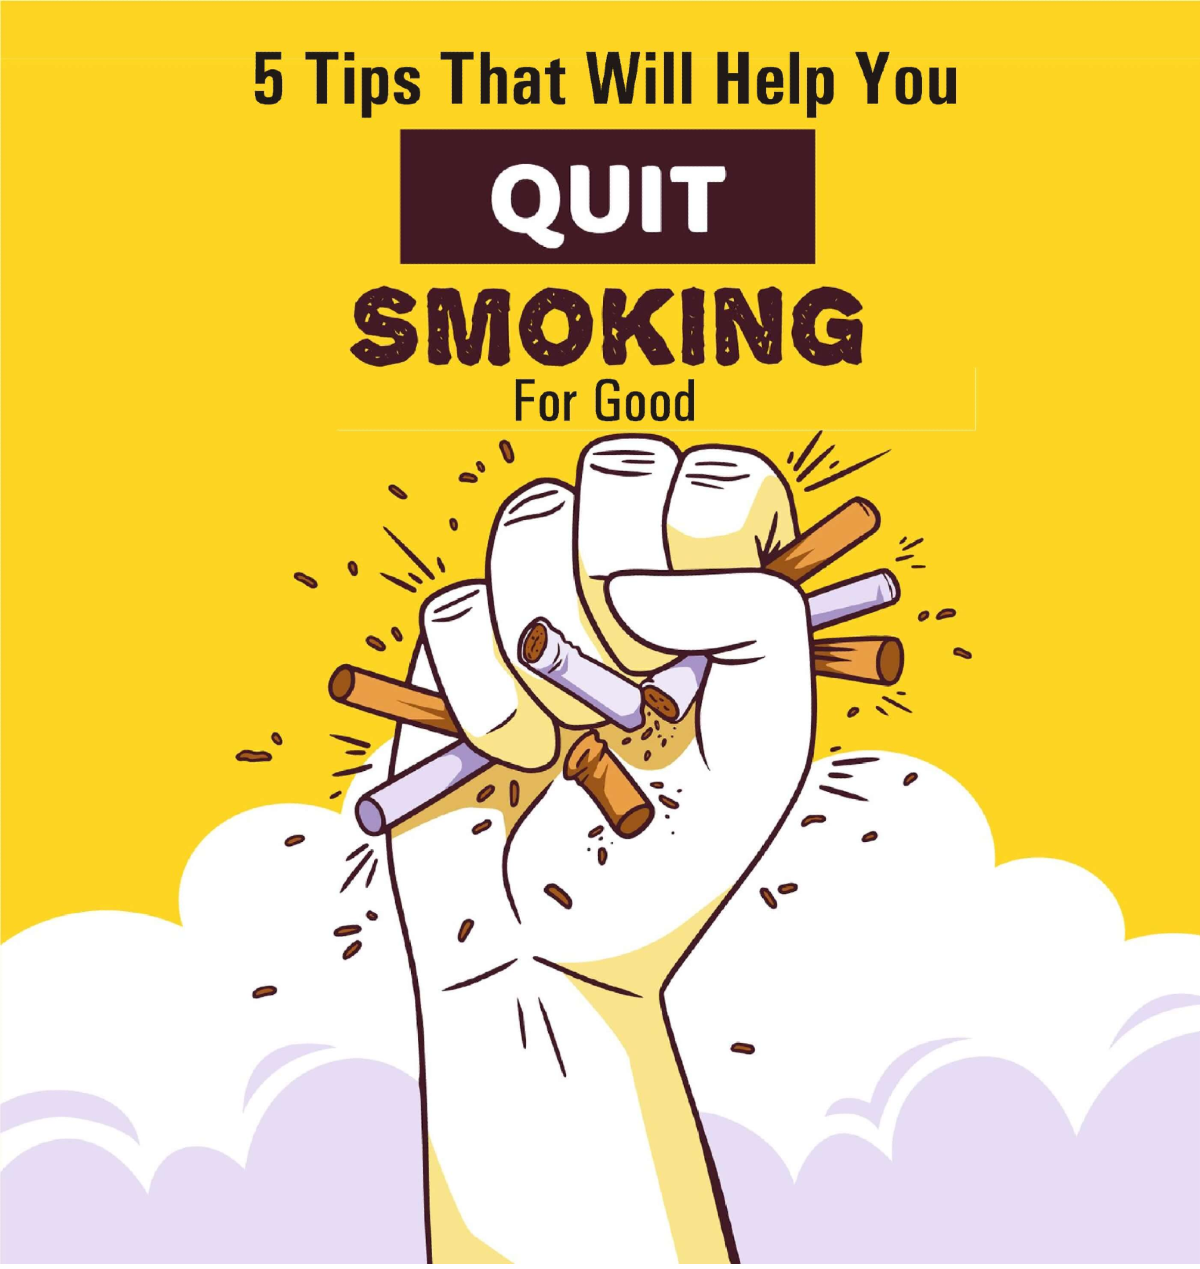 10 Health tips for quitting smoking